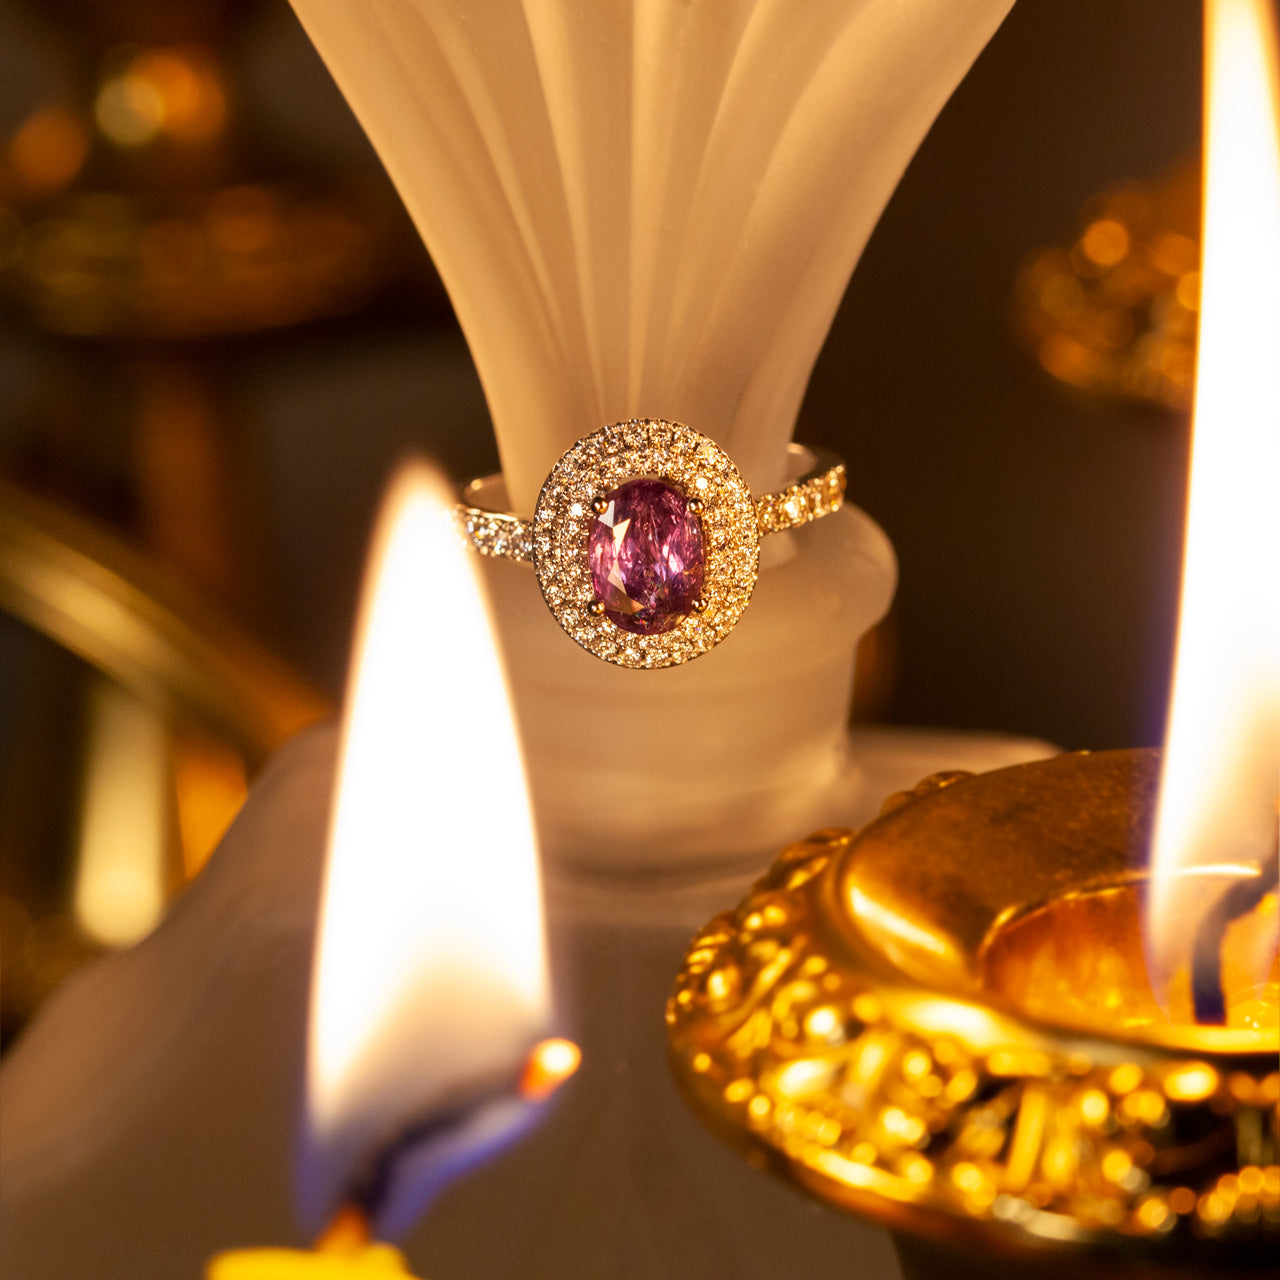 1.17ct alexandrite set in an 18k white gold band beside a decorative candle